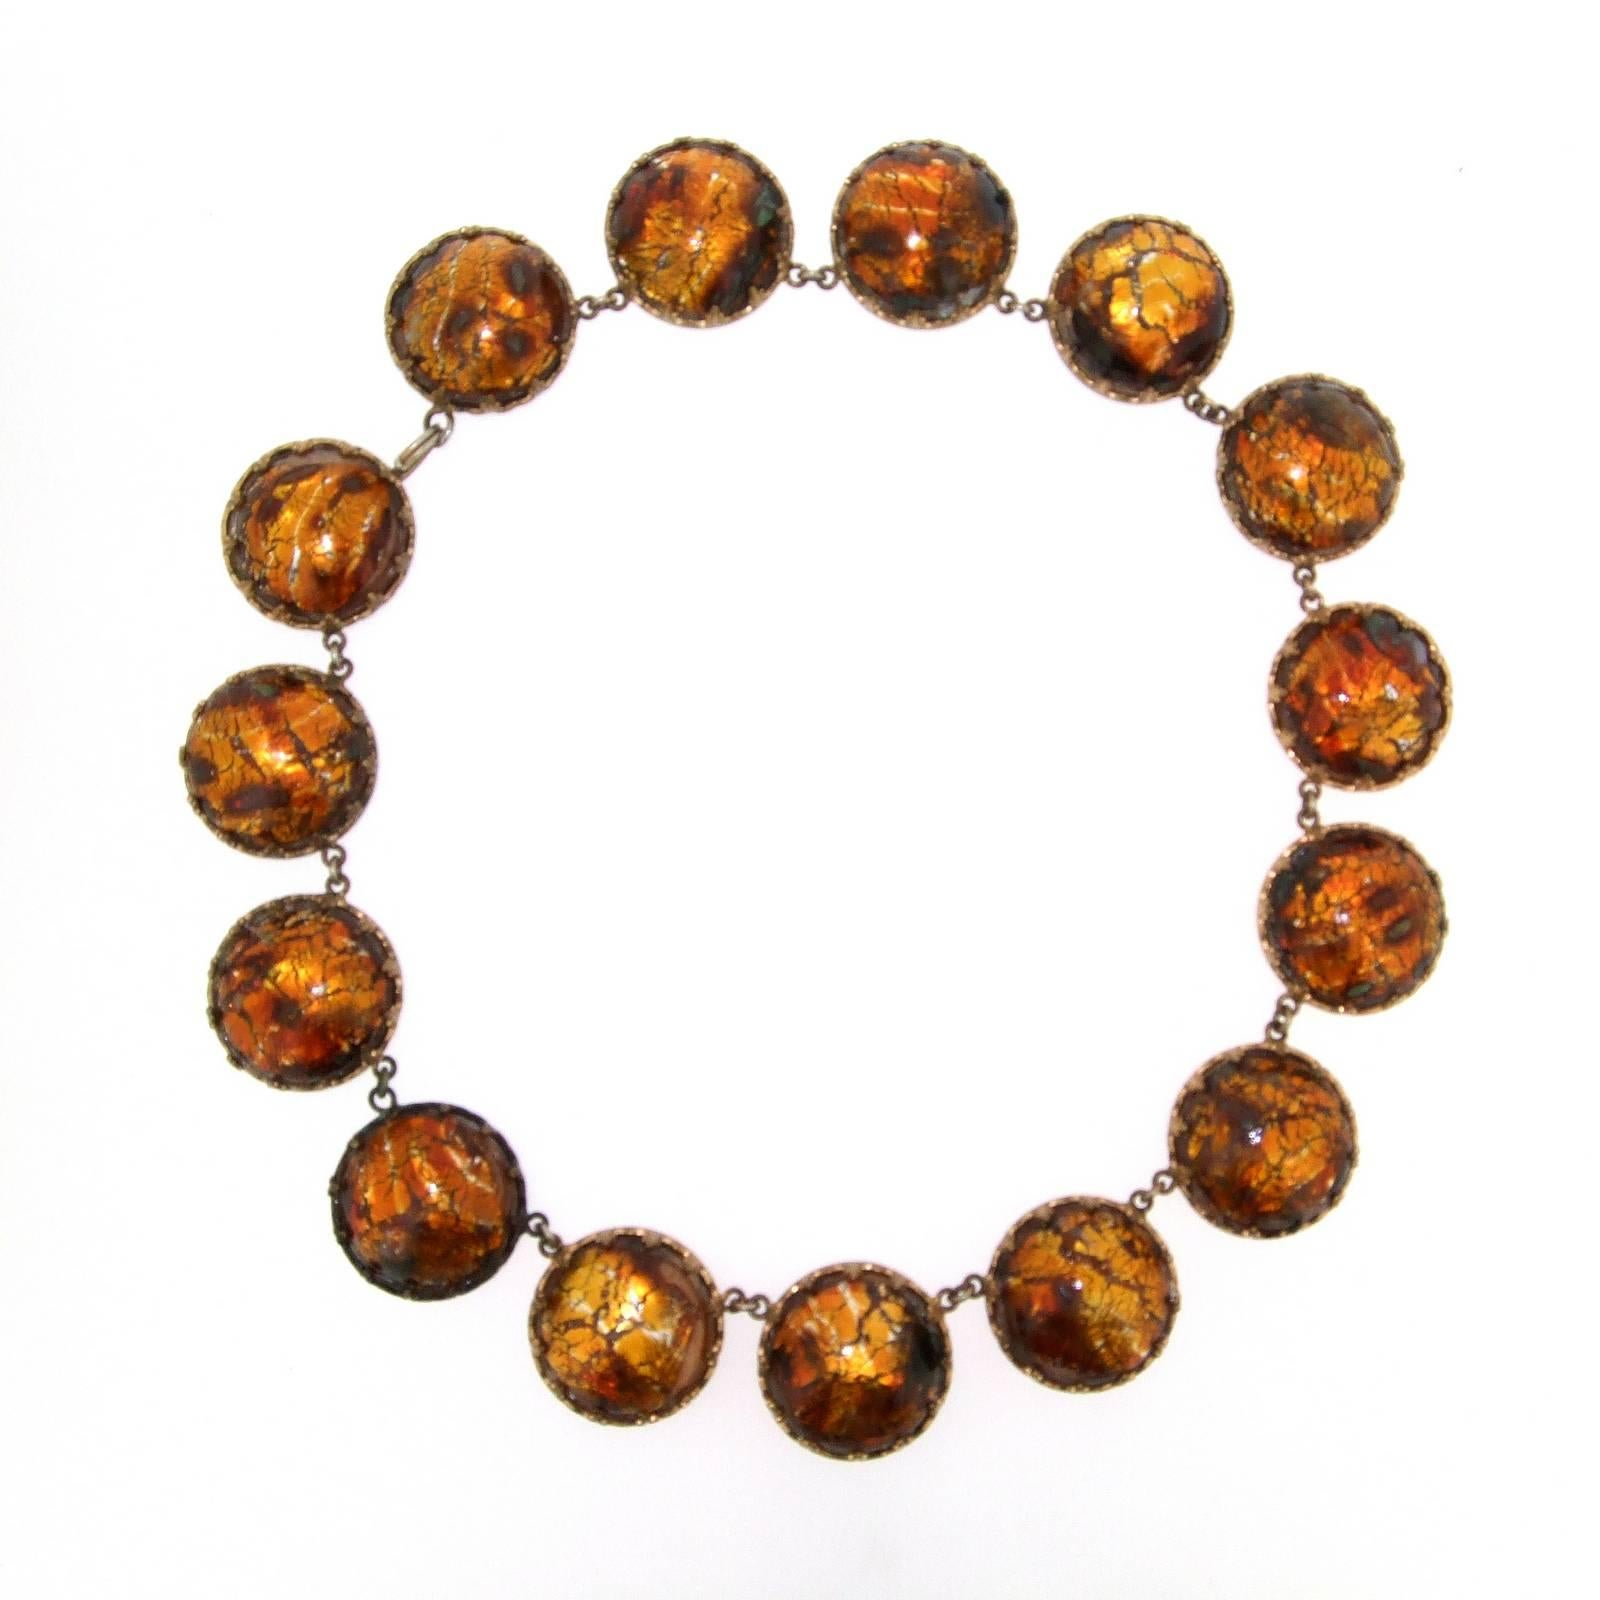 A beautiful vintage amber effect venetian foil glass necklace in great condition.

 It measures: 15 inches around the neck. each disc is 2.2cm wide.